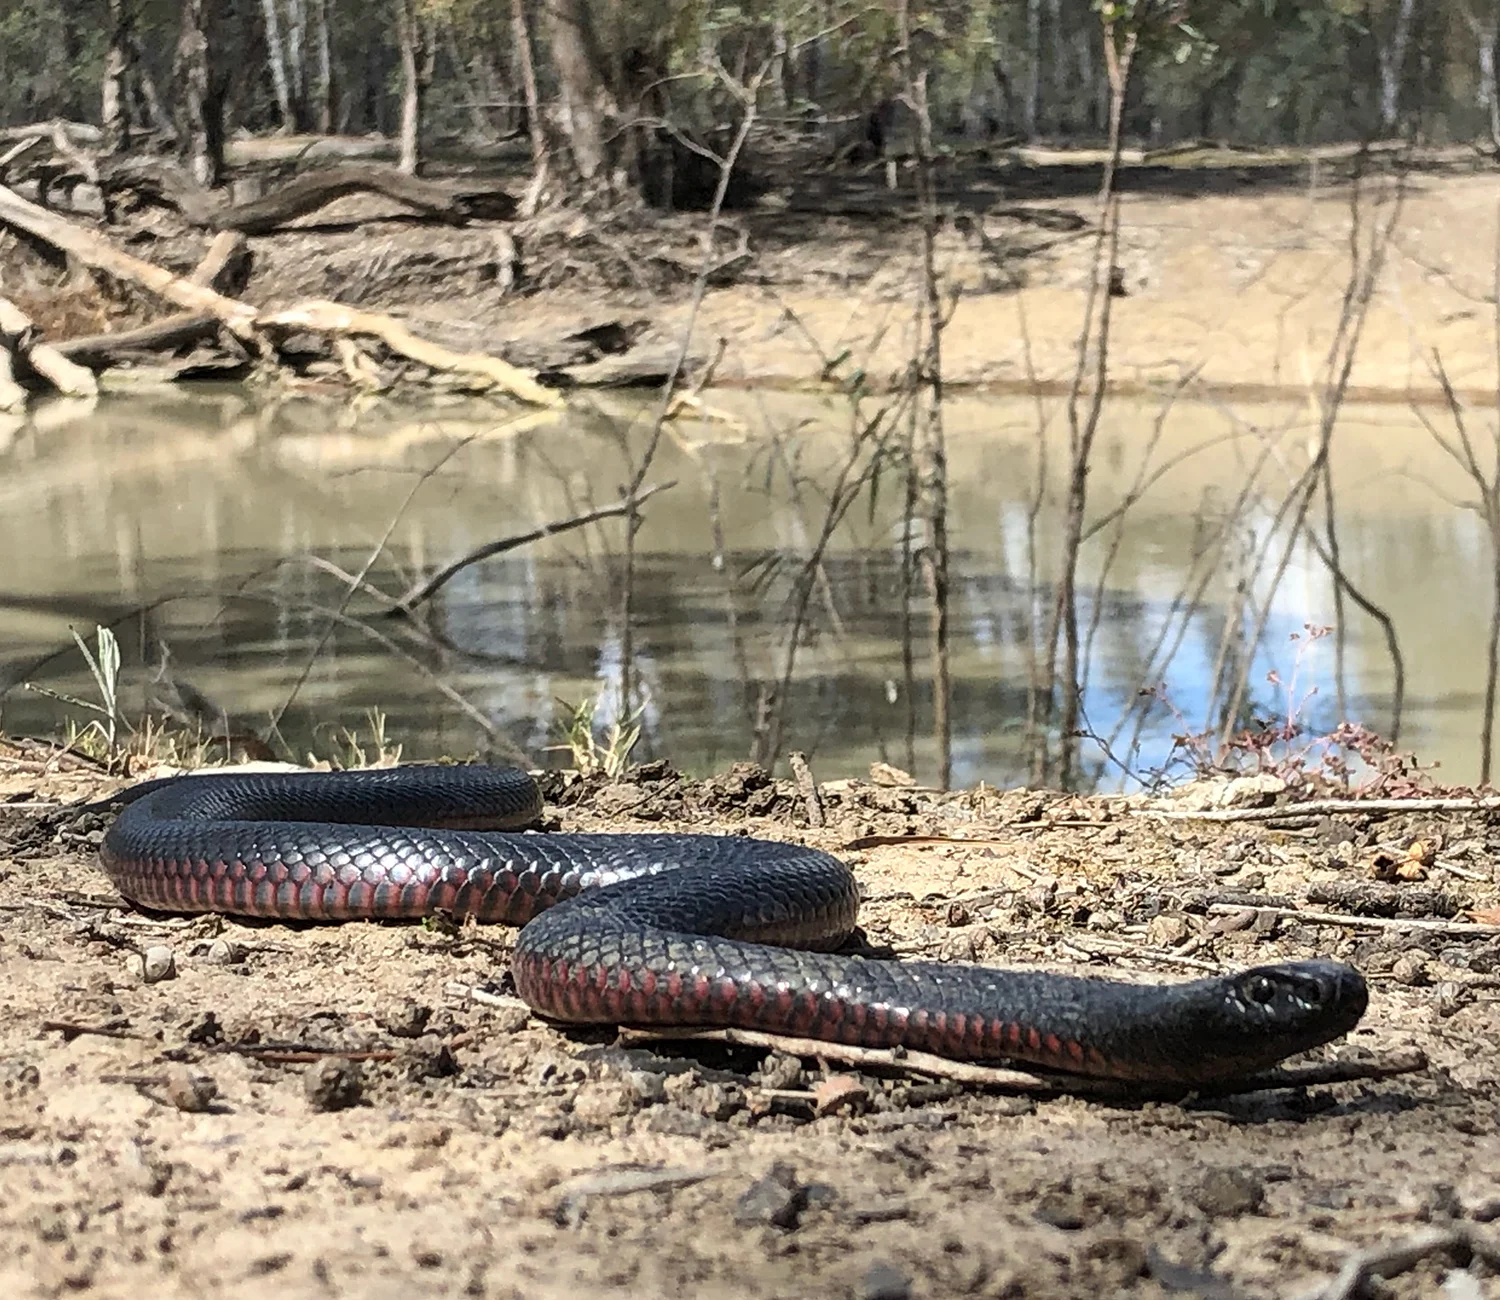 Red-bellied black snake. Photo credit: Damian Michael